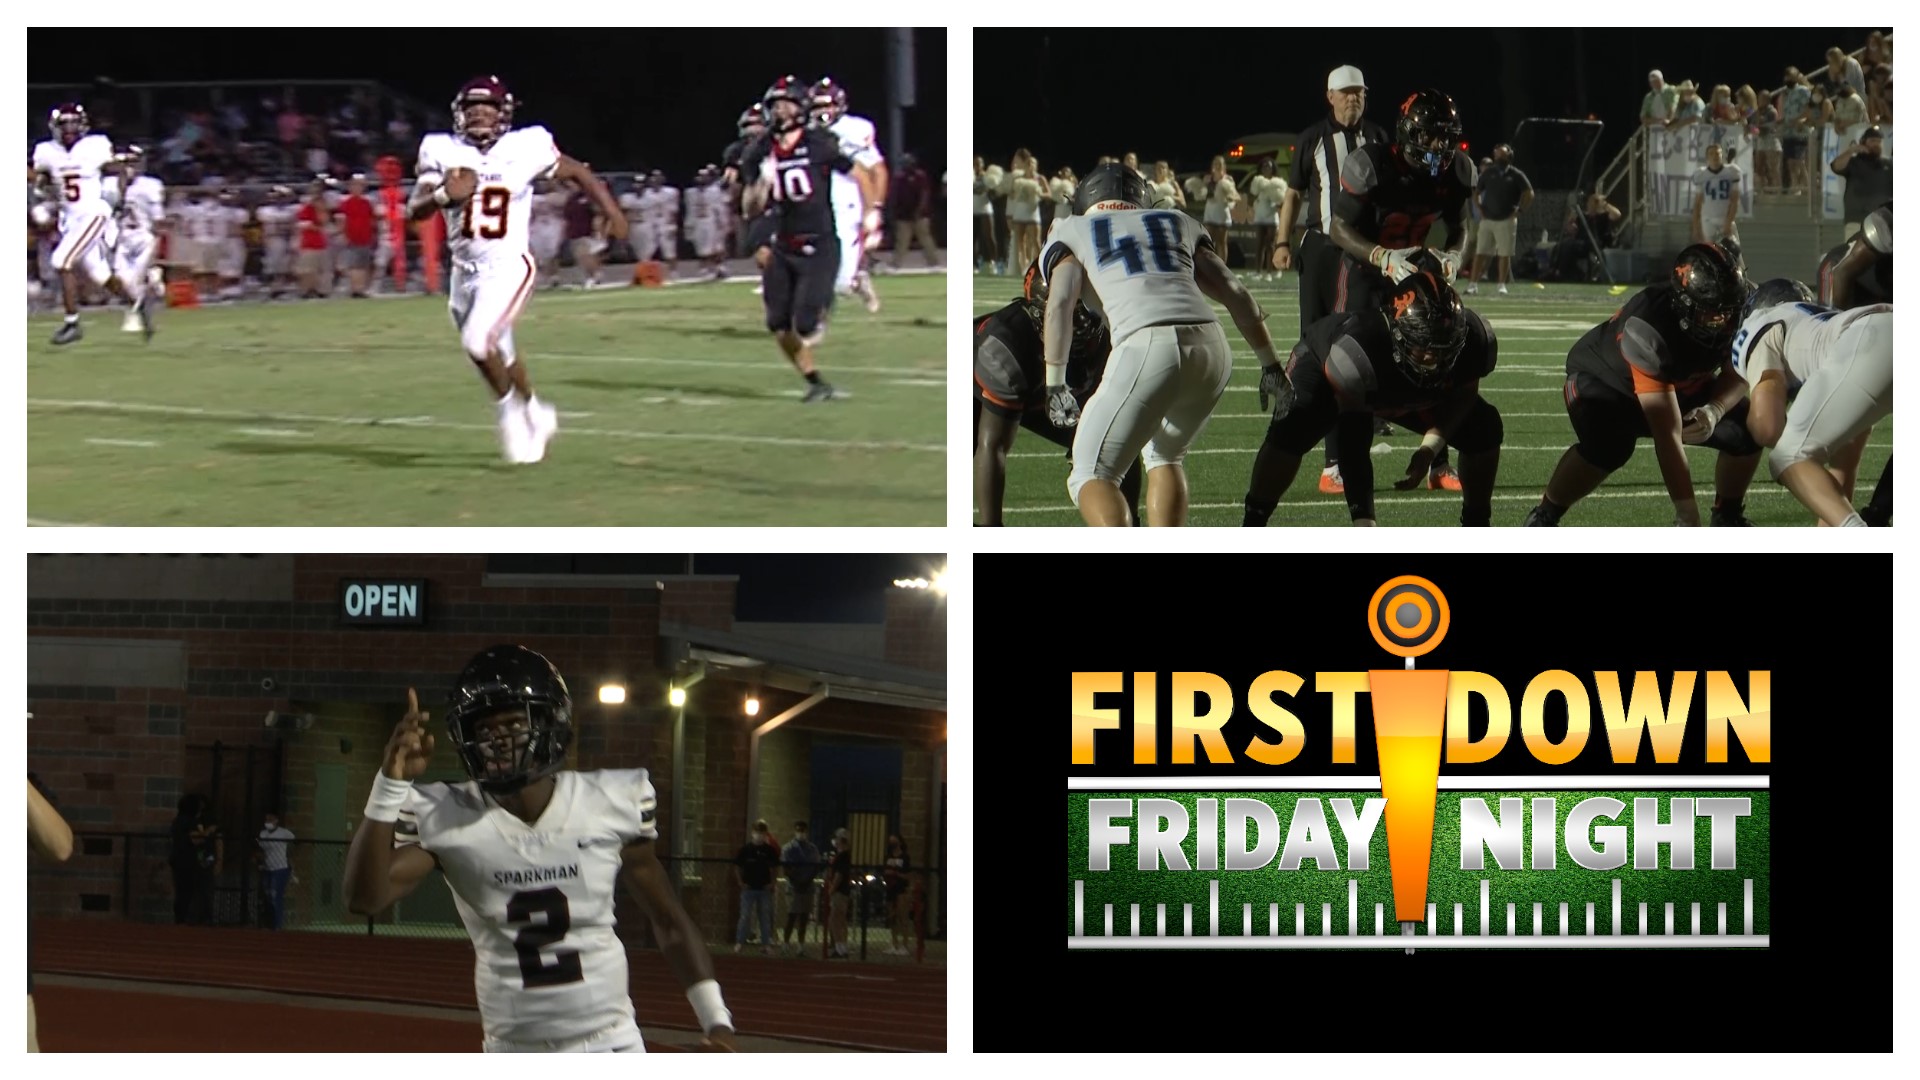 Week 3 of the AHSAA football season featured a slew of great games, especially in Class 7A Region 4. Check out highlights and scores on the latest edition of FDFN